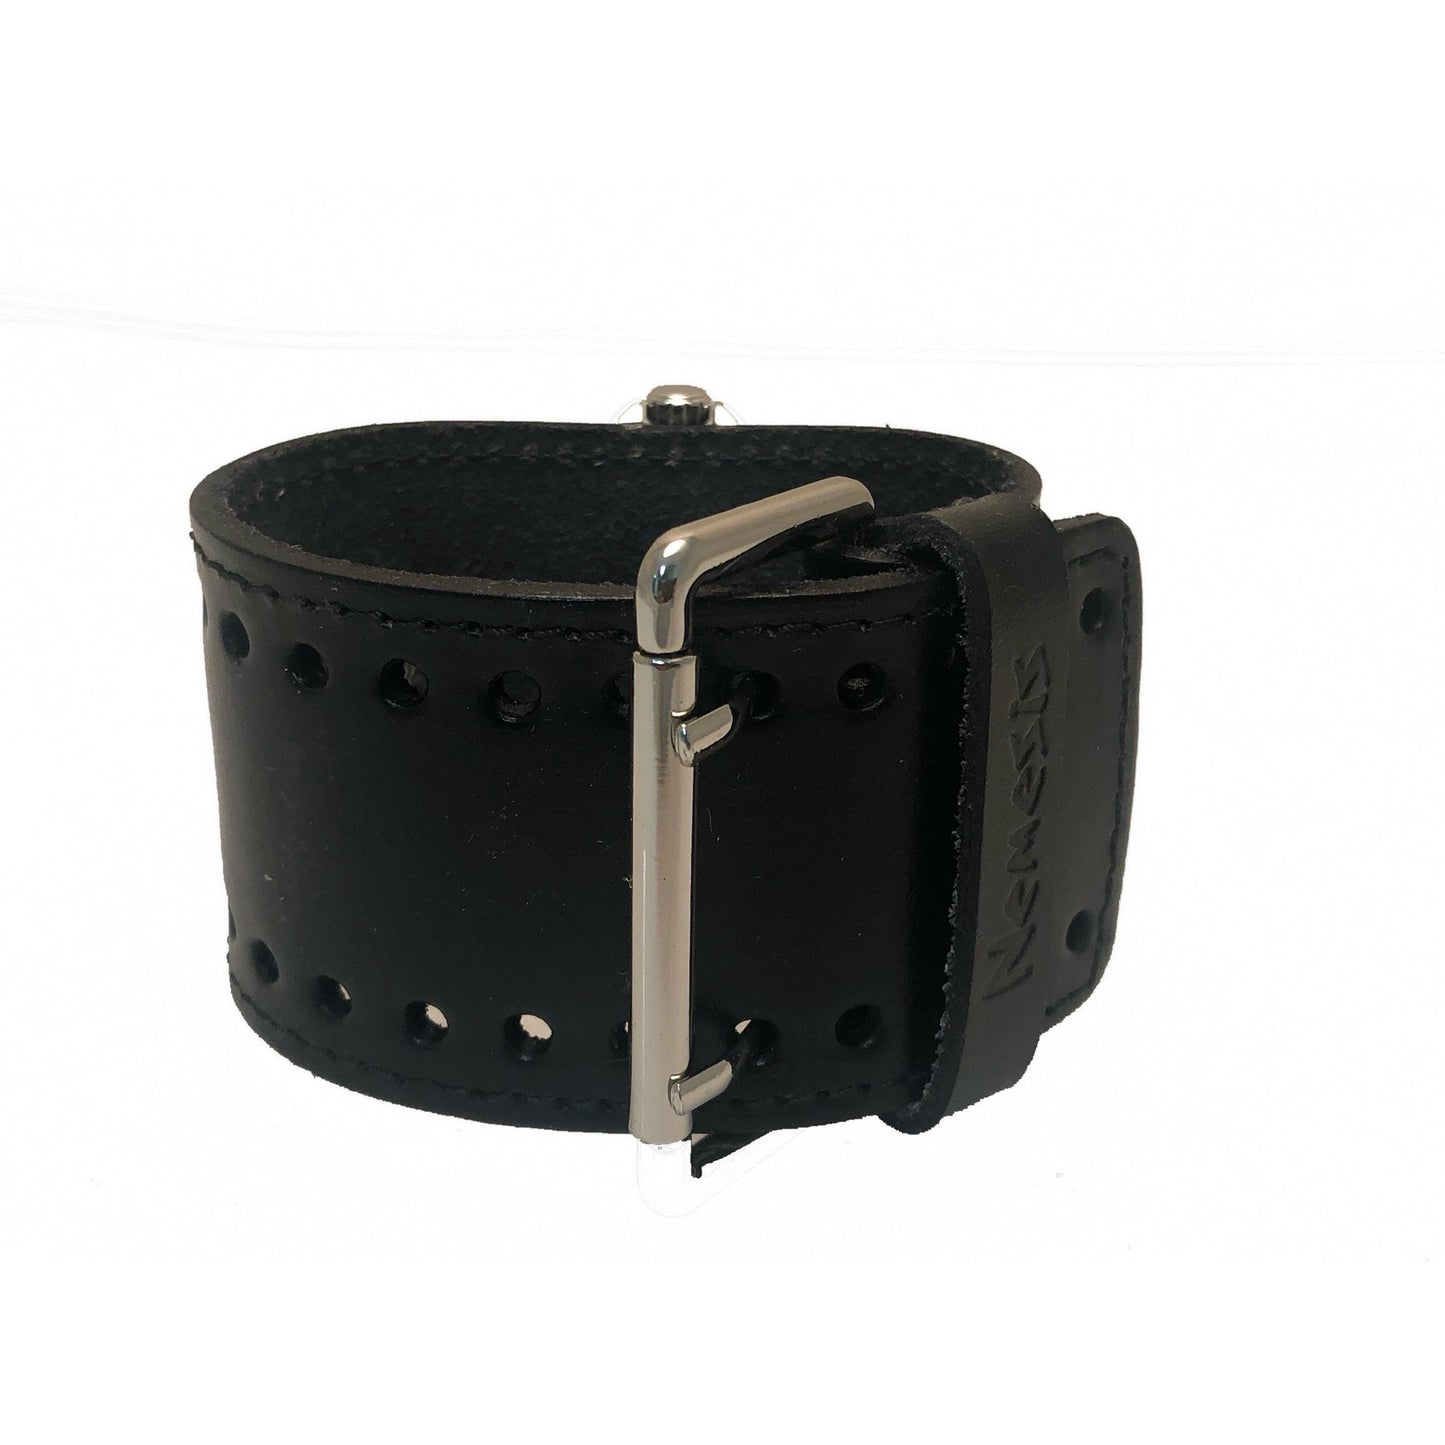 Moonwalker Luminous Blue Diver with Stitched Black Leather Cuff